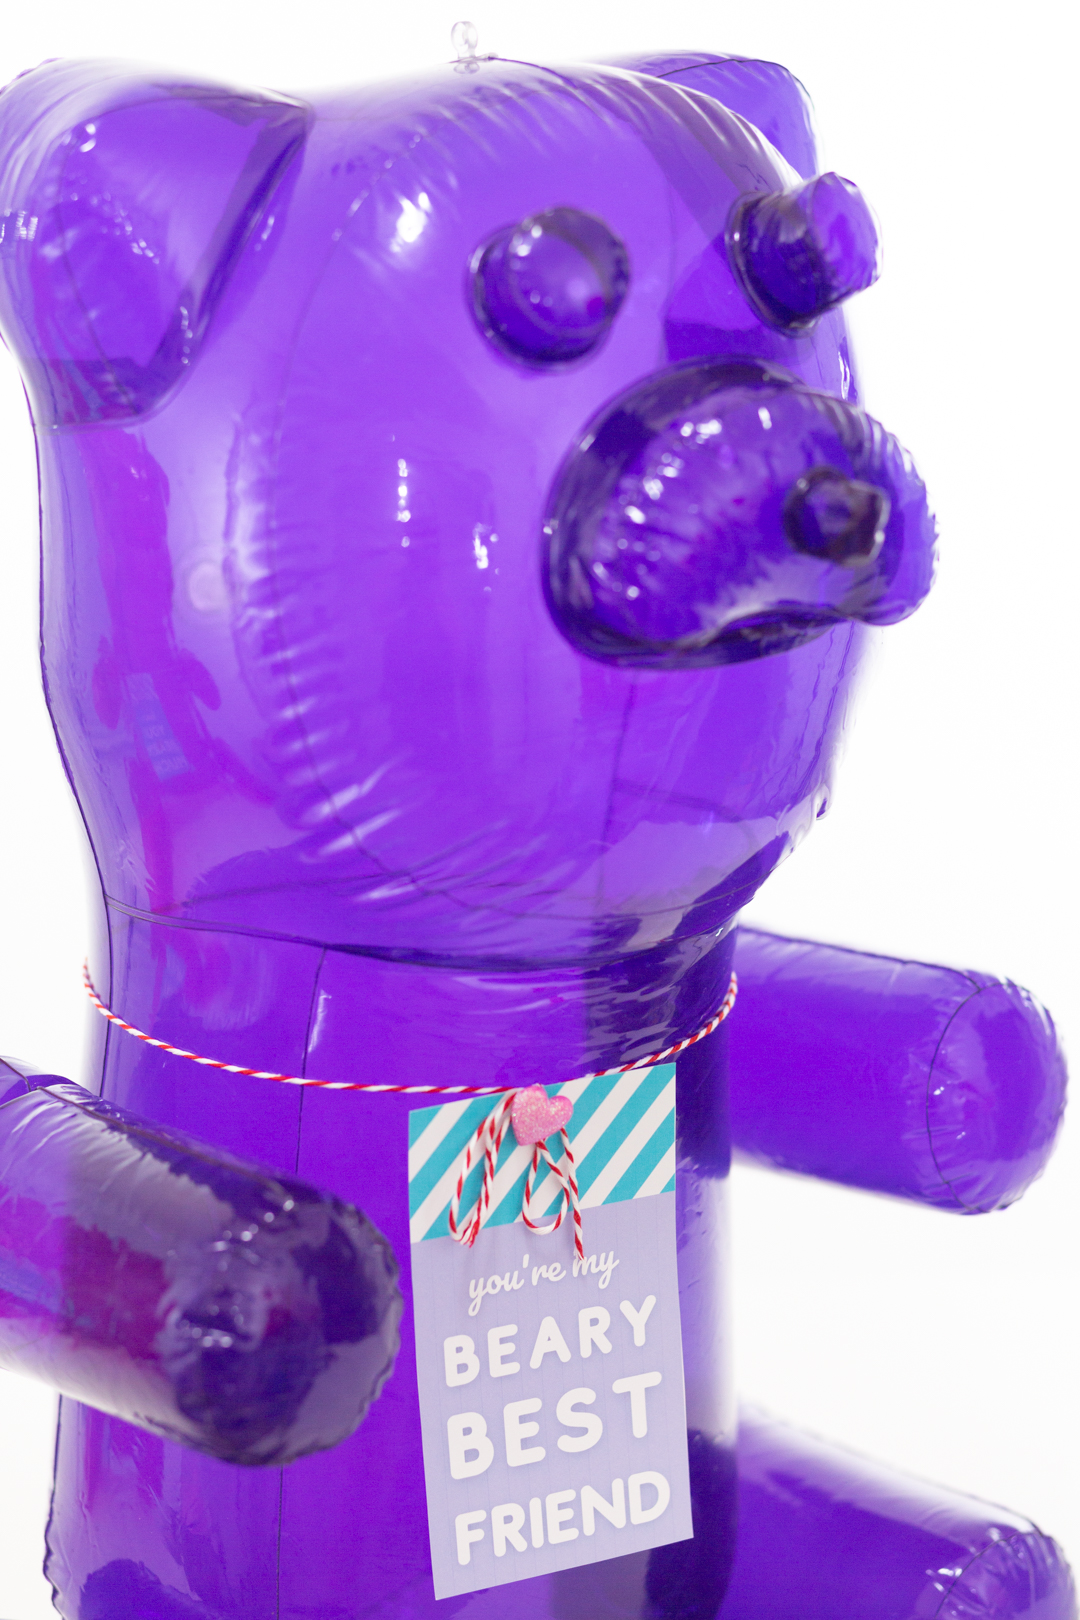 Big purple blow up gummy bear with valentine's day gift tag